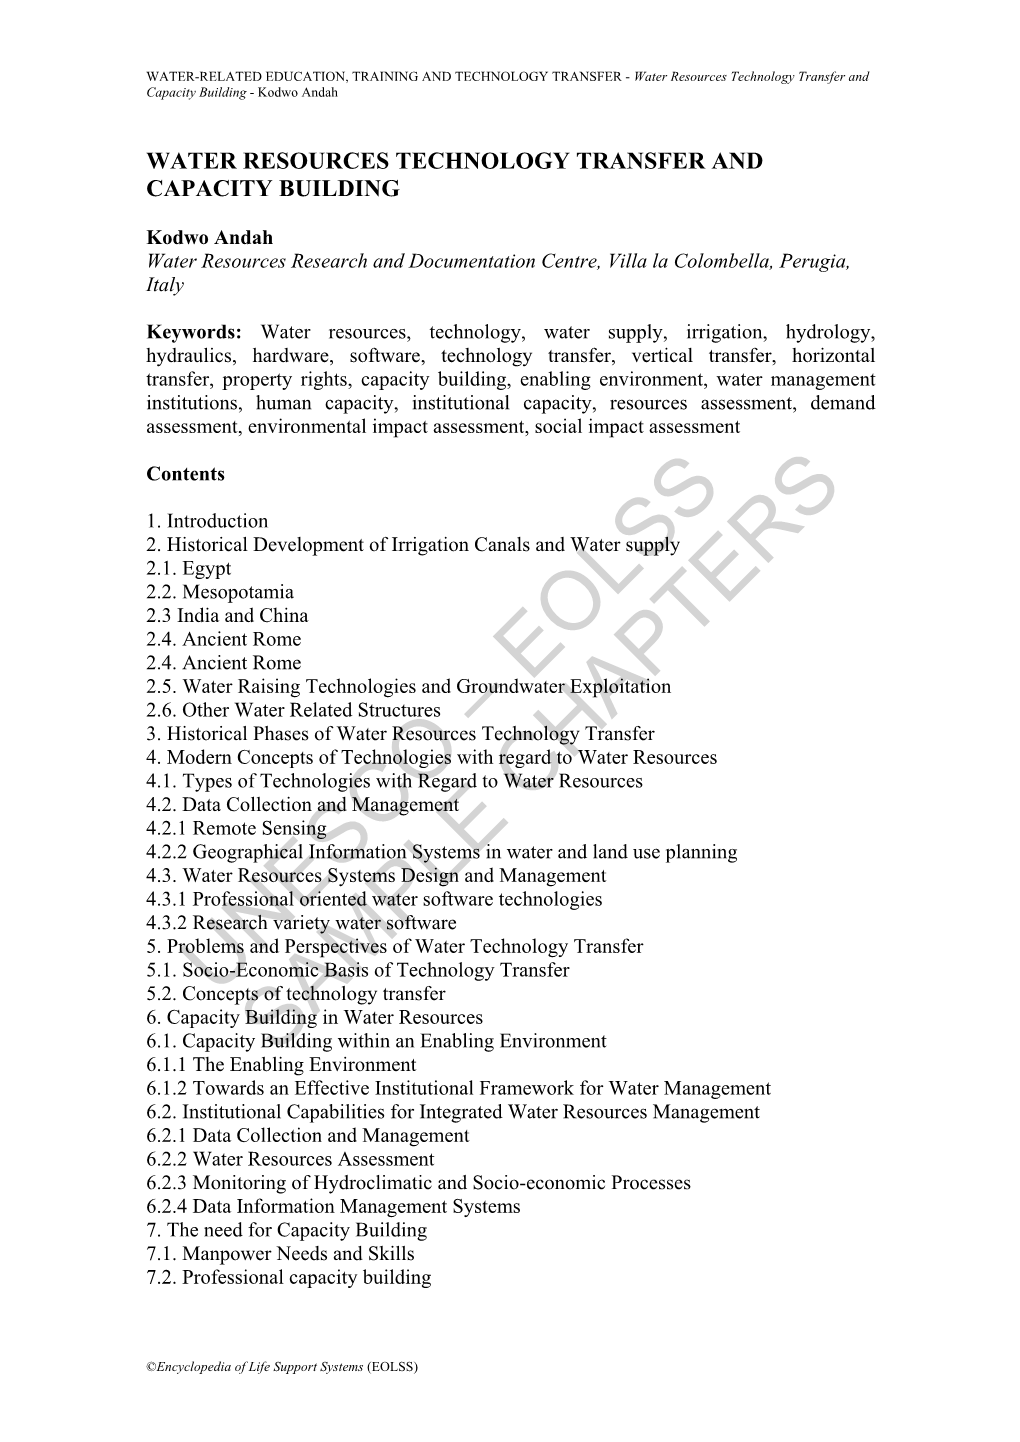 Water Resources Technology Transfer and Capacity Building - Kodwo Andah